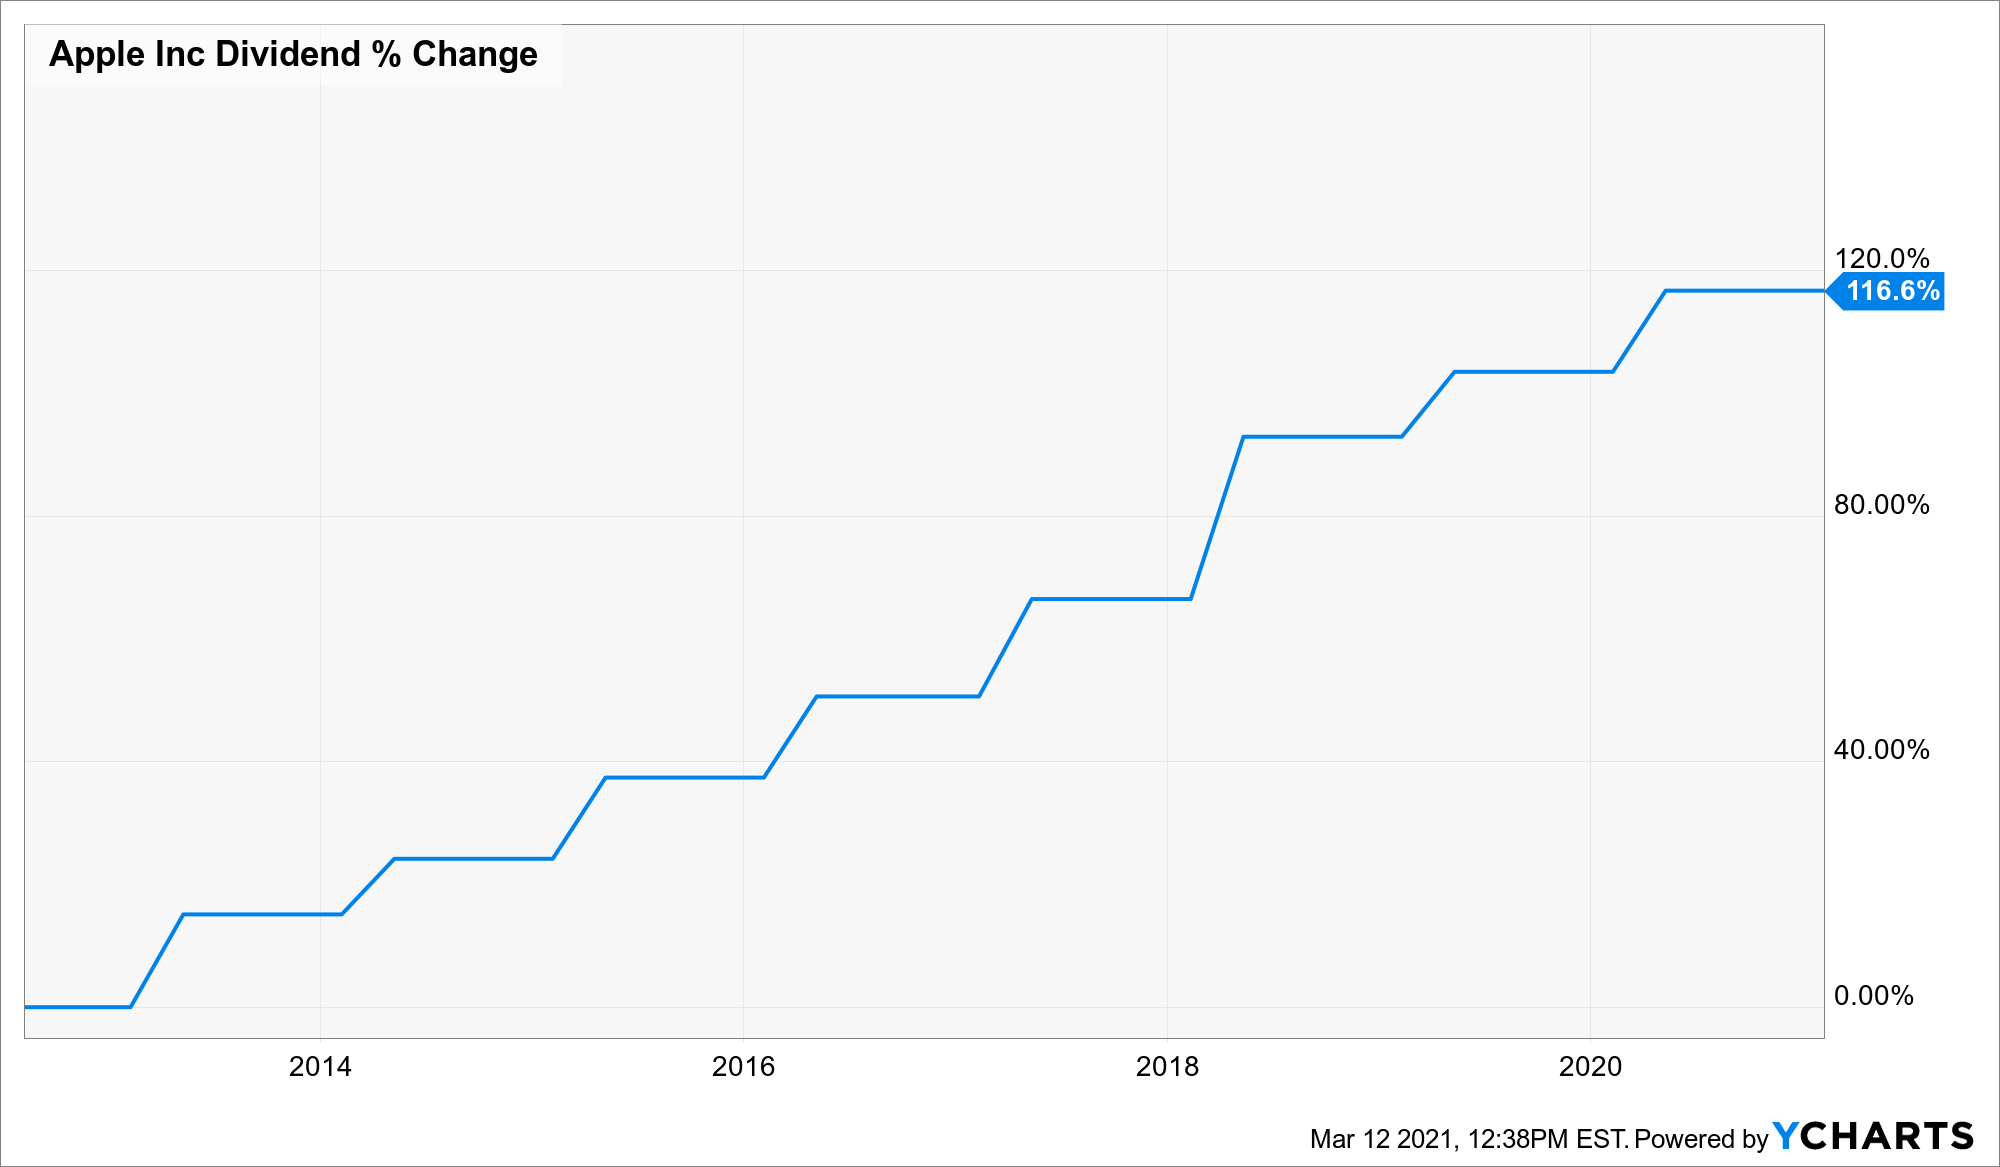 Apple (AAPL) This "MustOwn" Stock is About to Increase Its Dividend